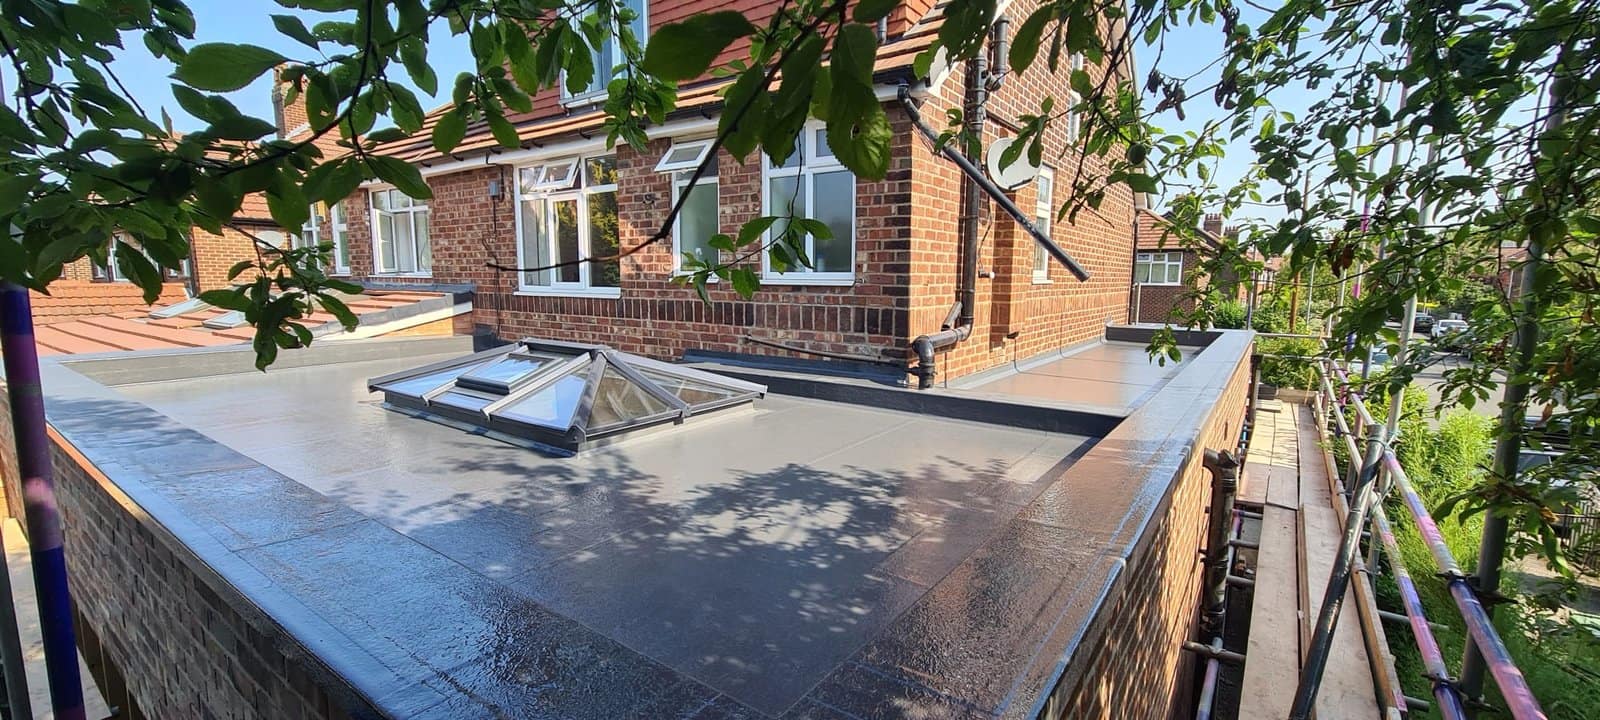 GRP Flat Roof installed by our roofers in Manchester.